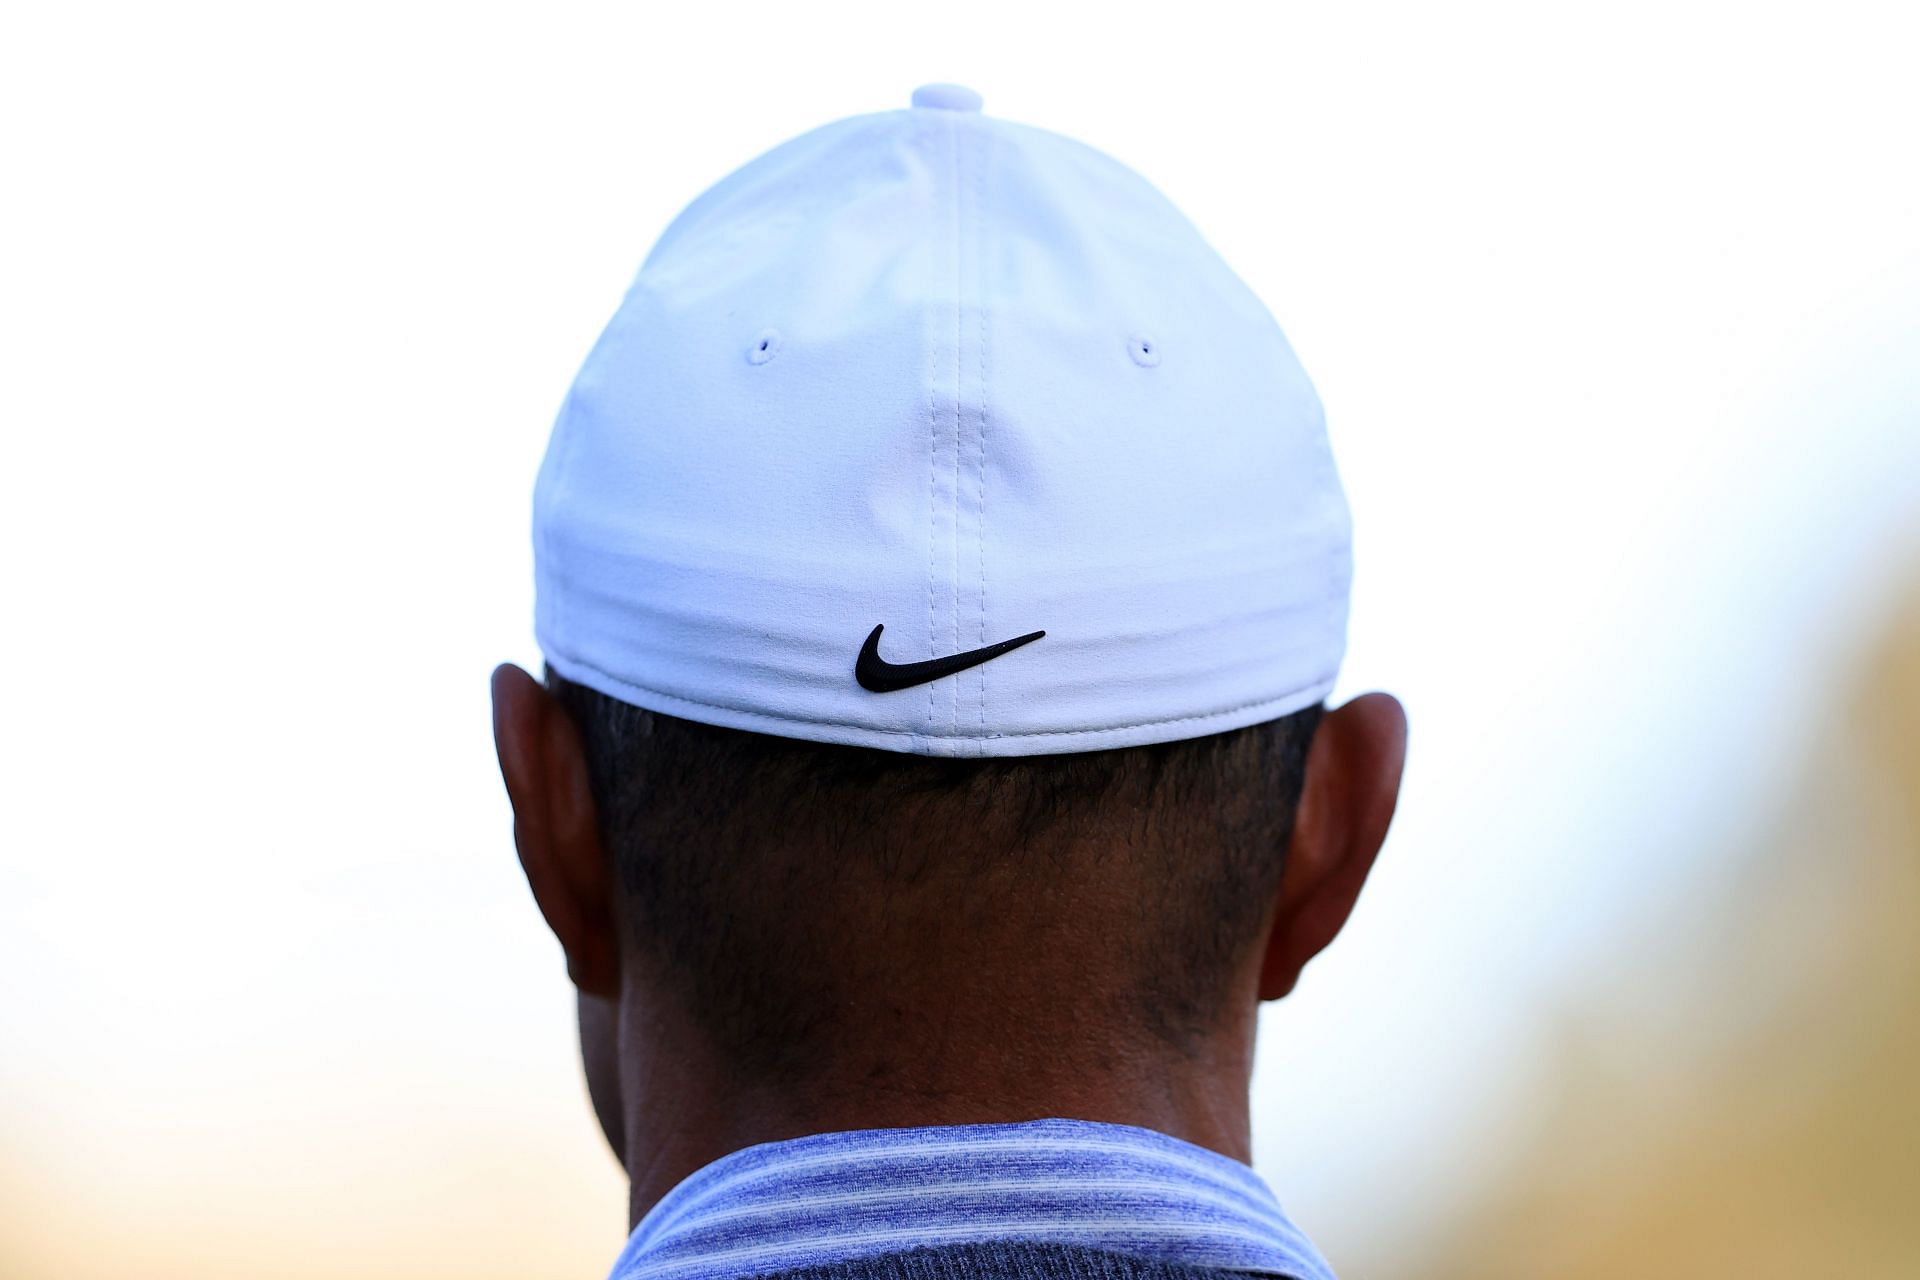 How much does Nike pay Tiger Woods per